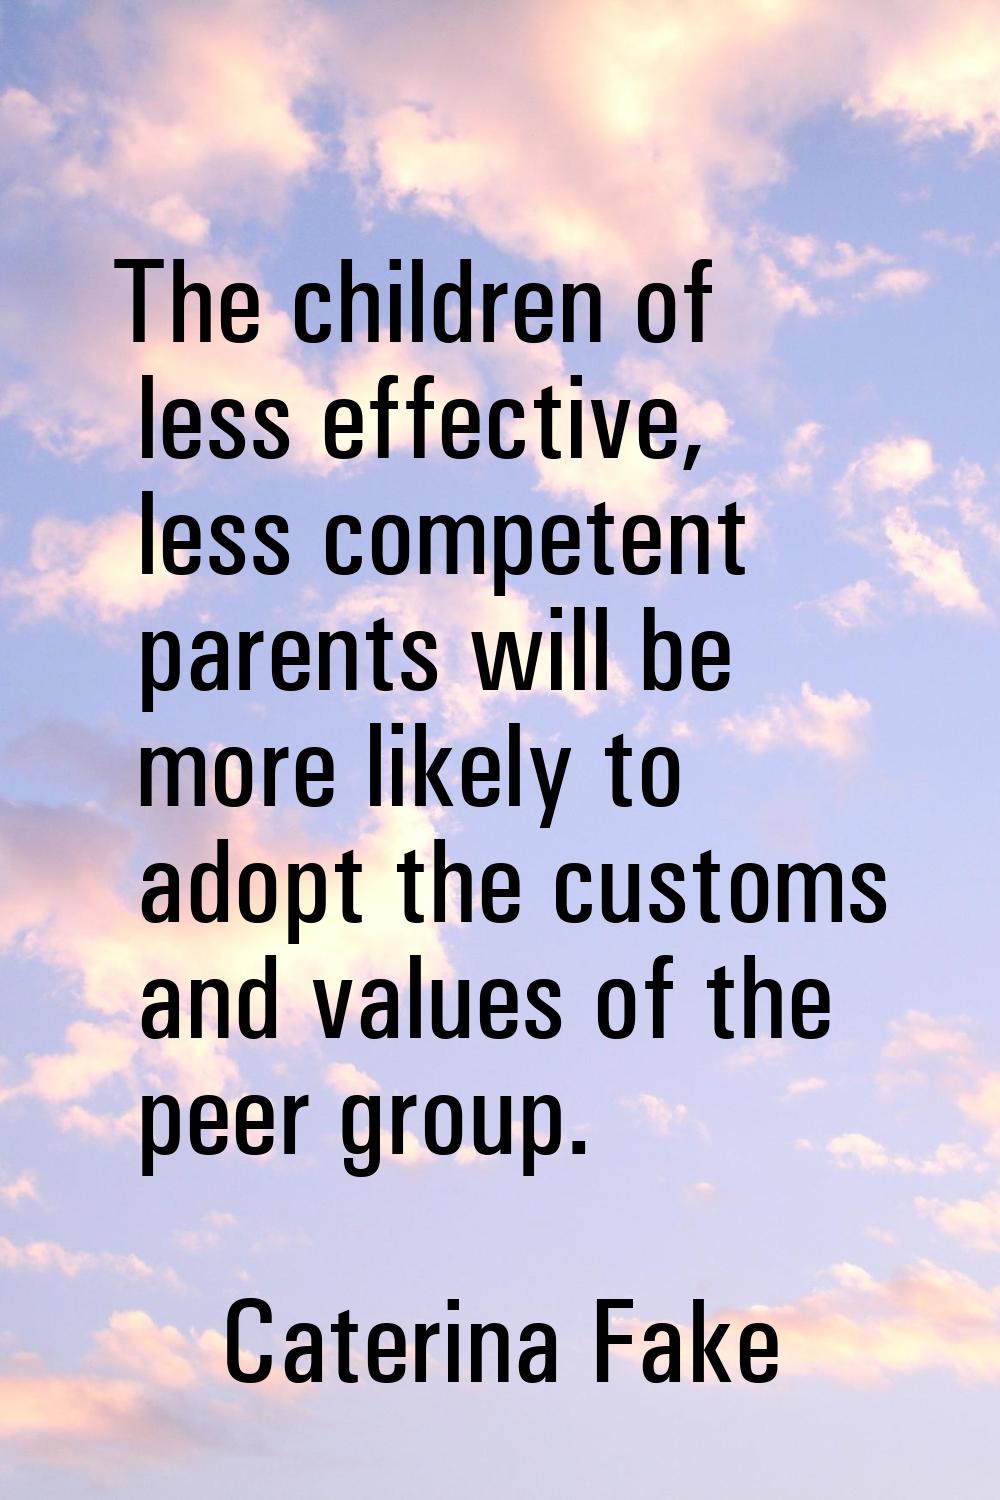 The children of less effective, less competent parents will be more likely to adopt the customs and